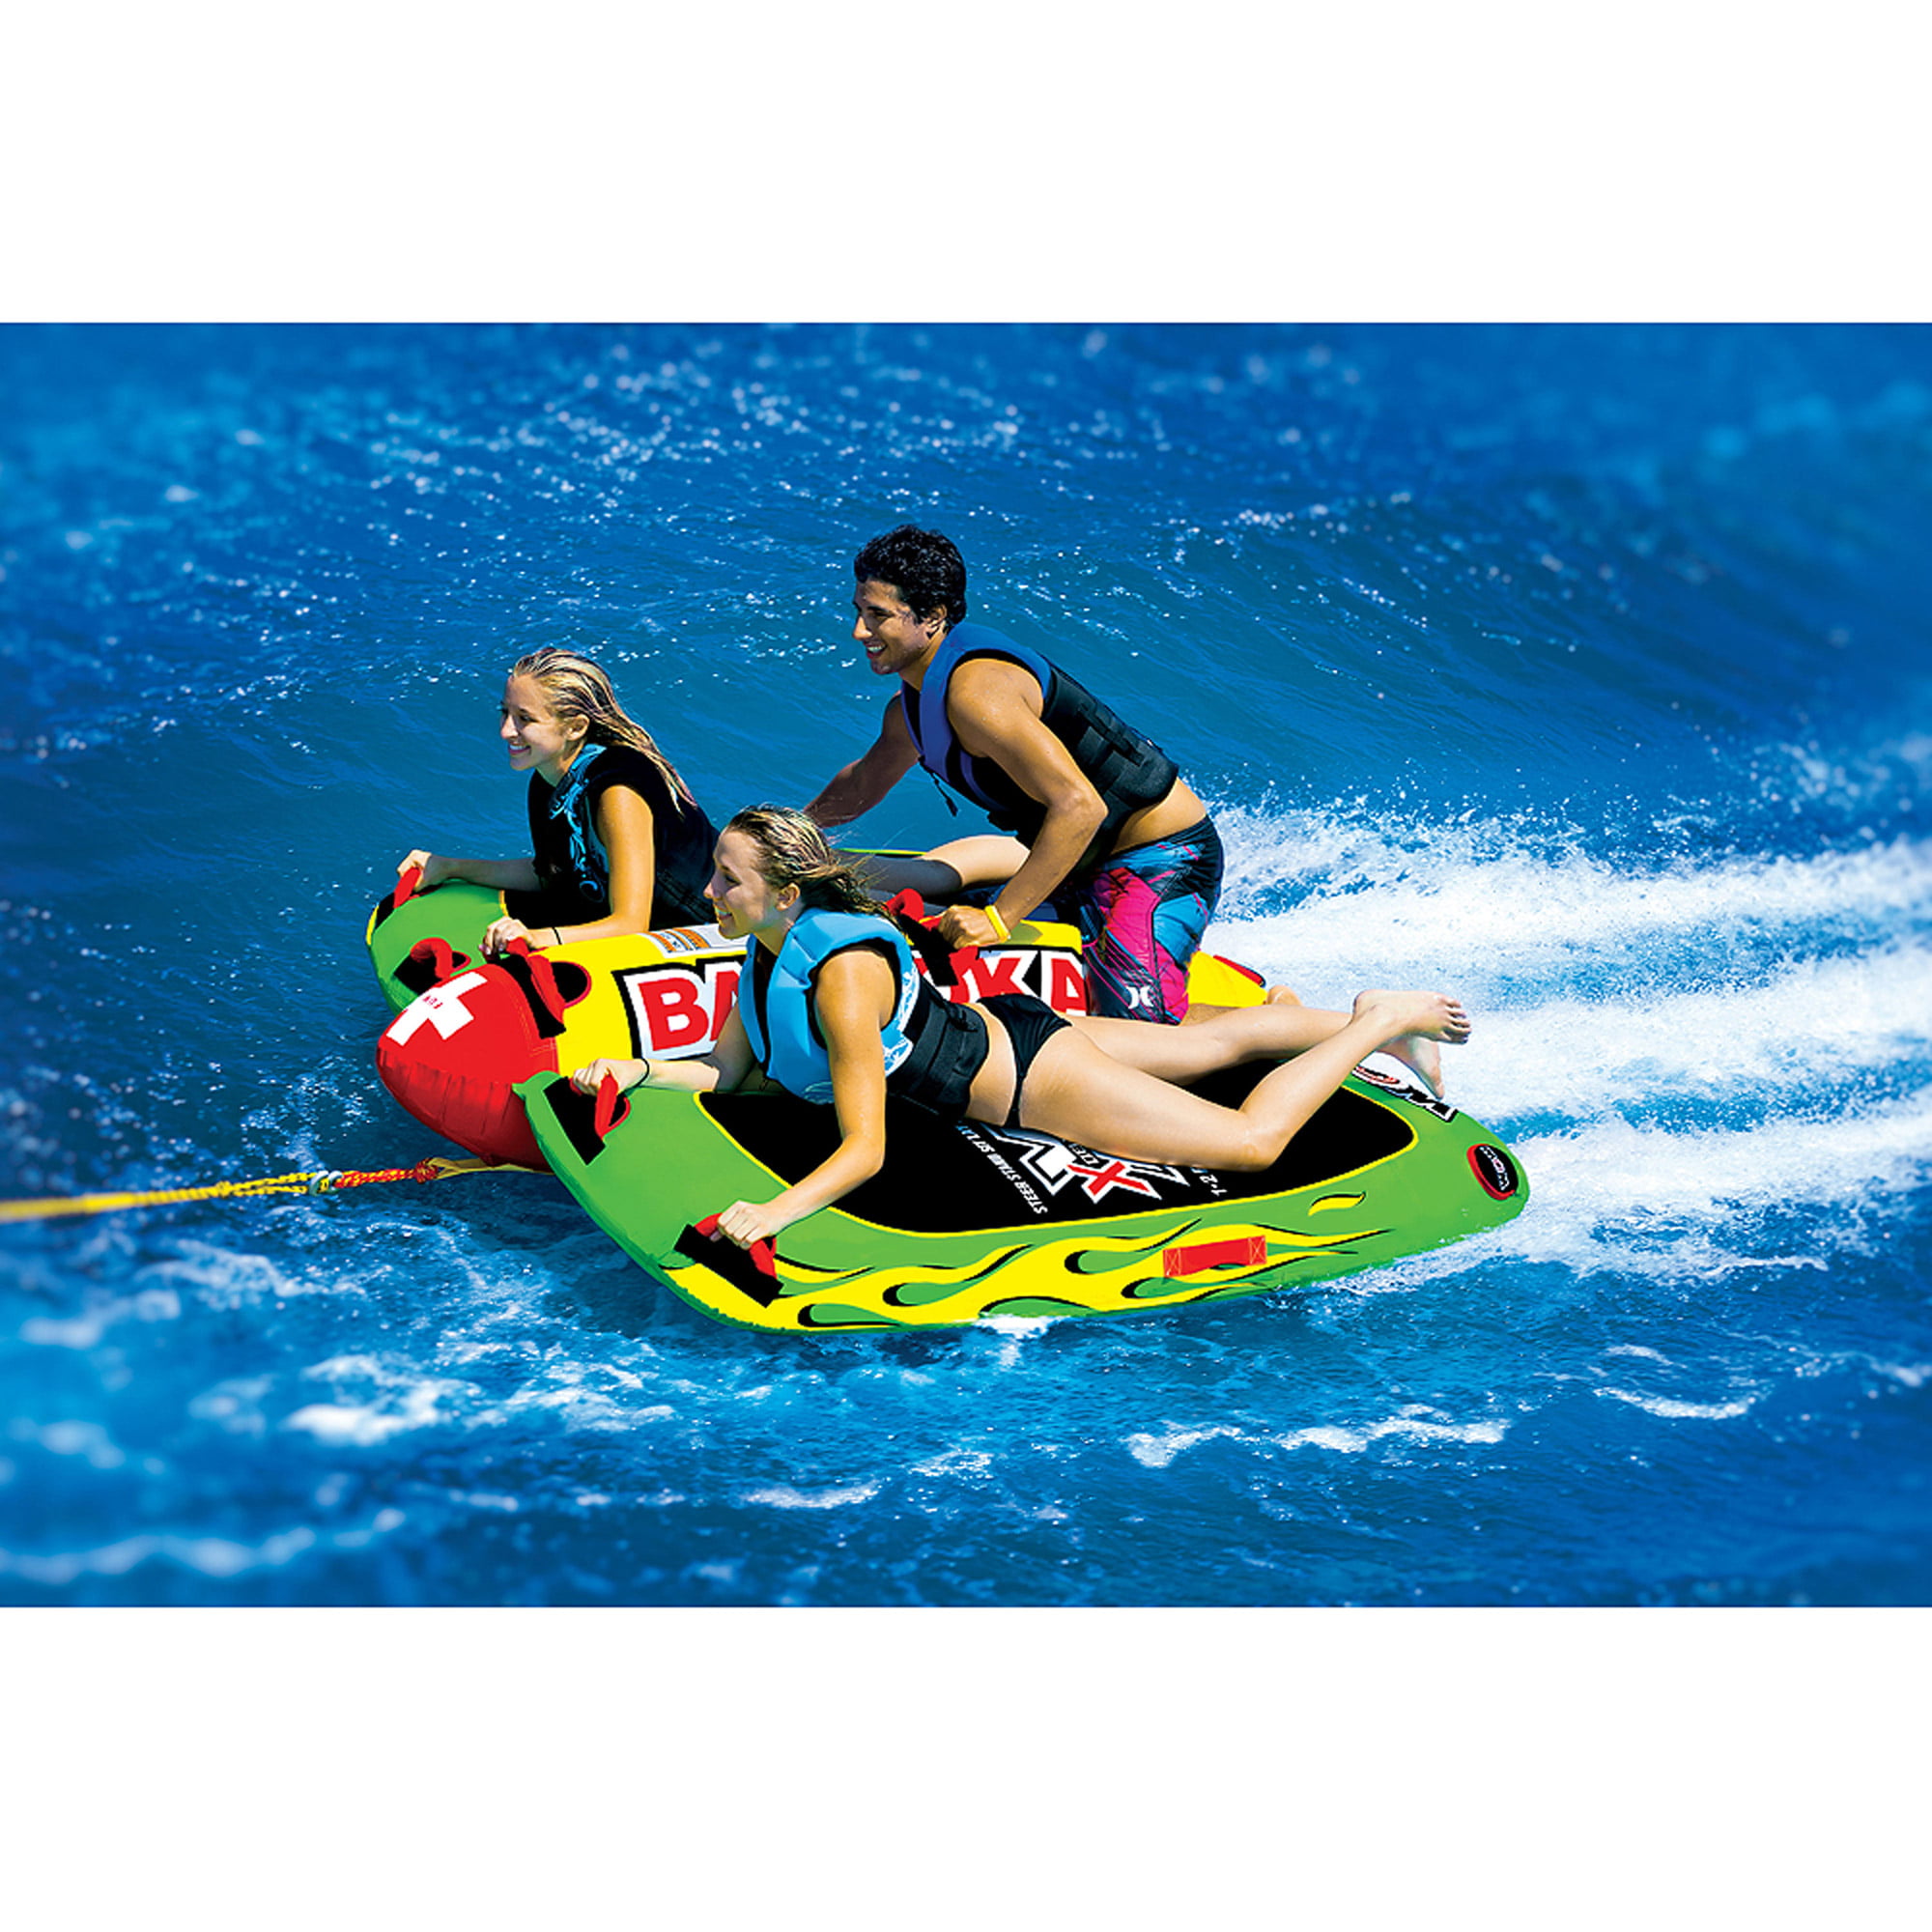 17-1020 WOW Sports Jet Boat 2 Person Towable Water Tube For Pool and Lake 